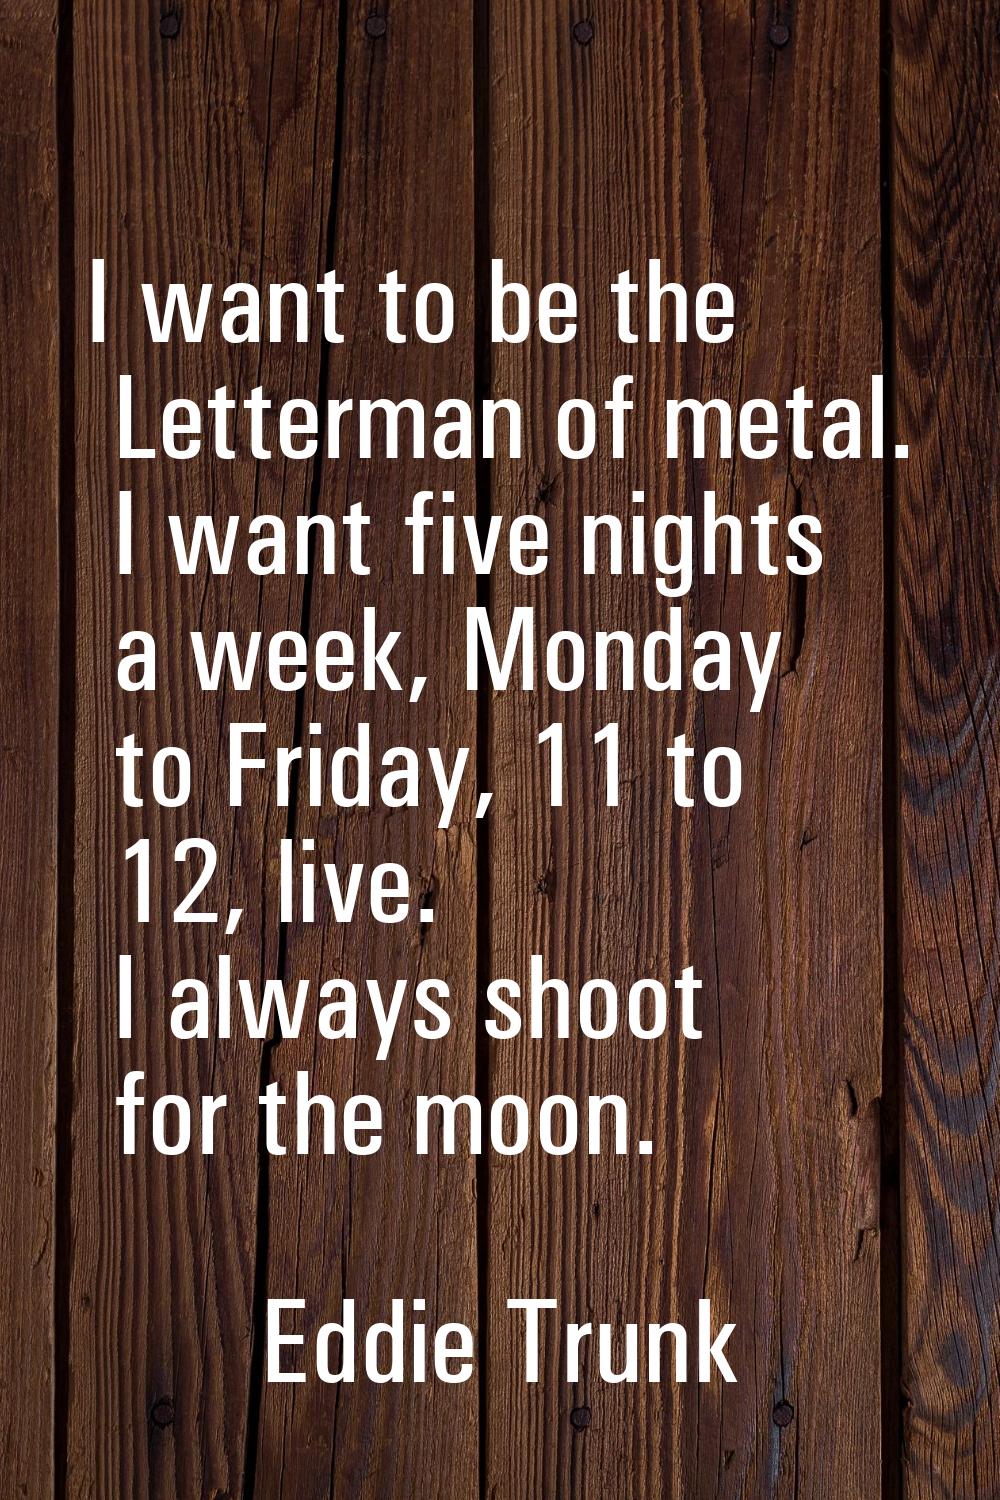 I want to be the Letterman of metal. I want five nights a week, Monday to Friday, 11 to 12, live. I